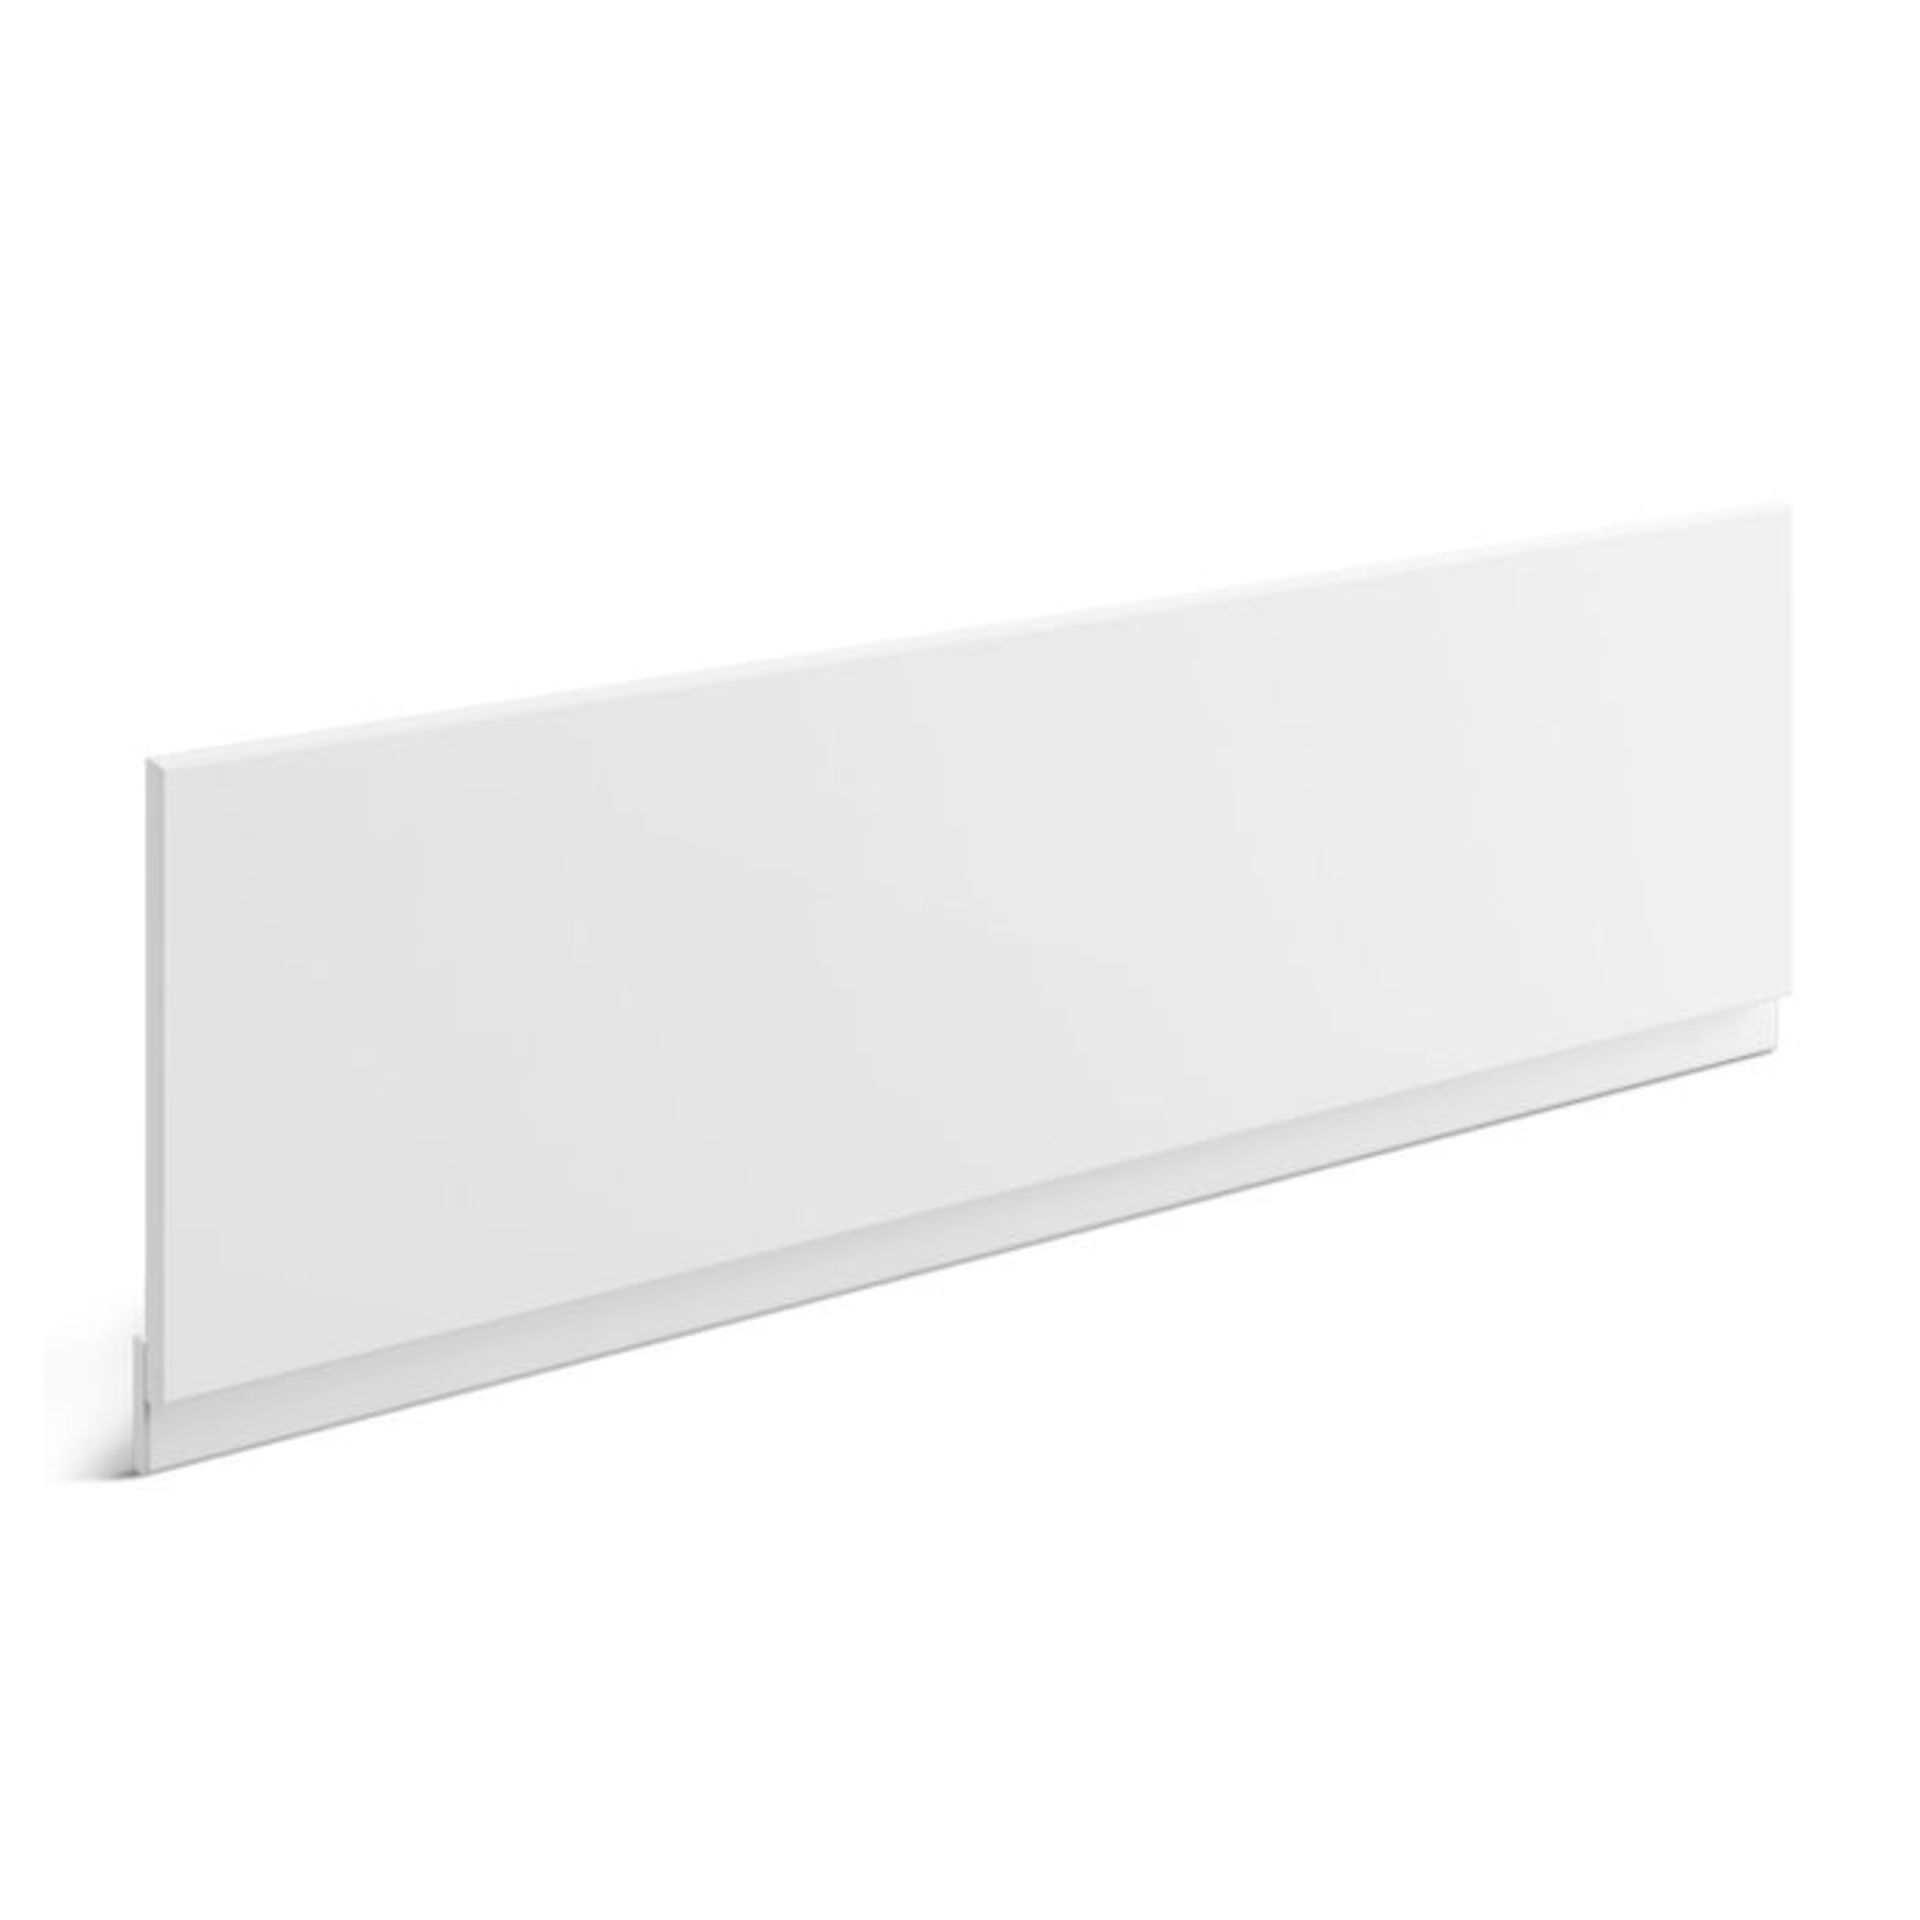 (C113) 1700mm MDF Bath Front Panel - Gloss White 18mm thick durable MDF board Adjustable Height : - Image 2 of 2